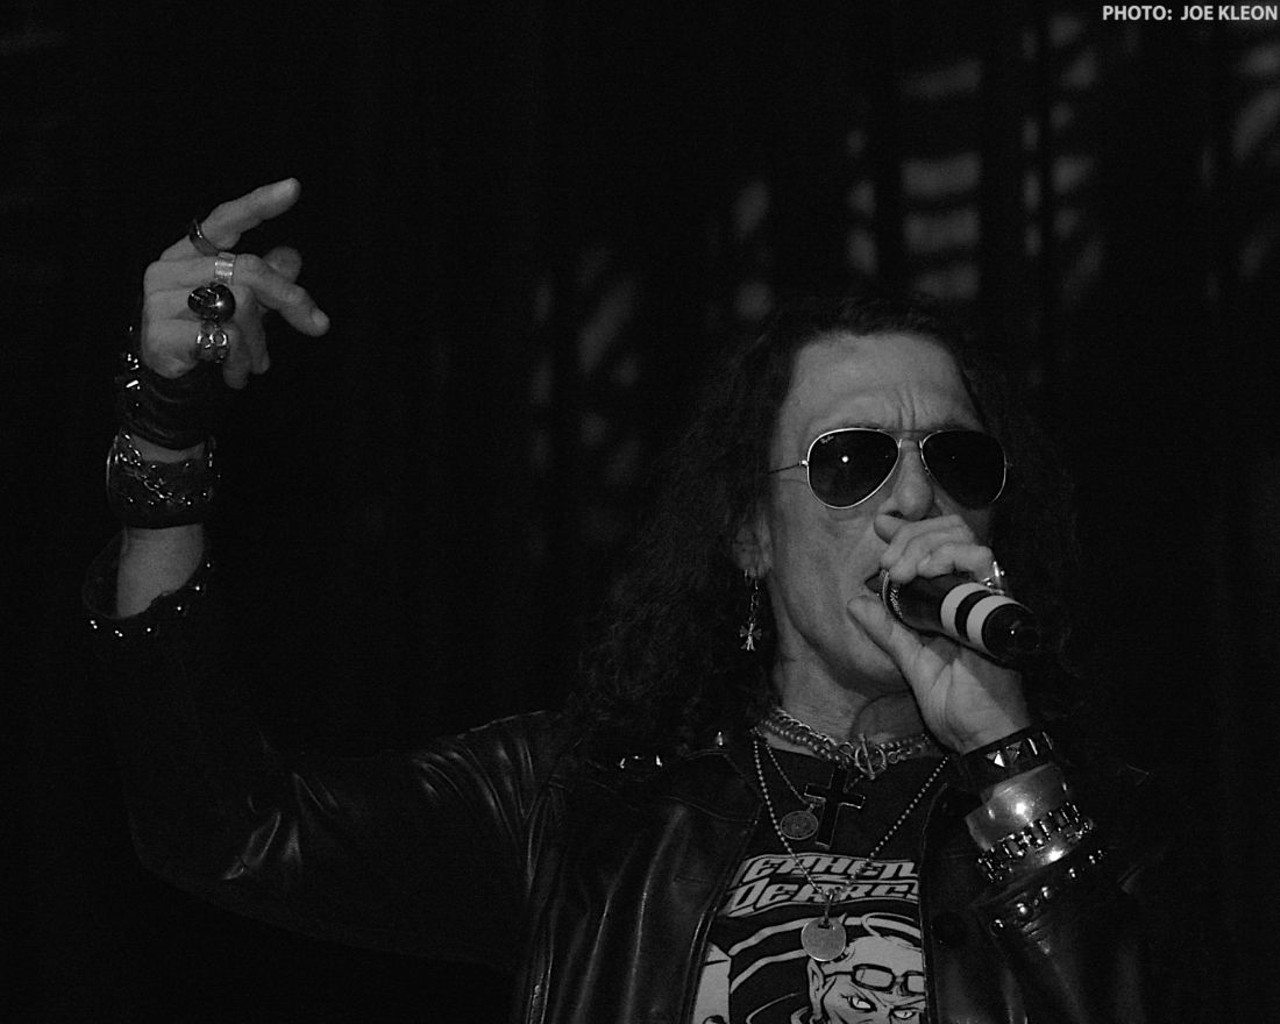 Stephen Pearcy Performing at the Kent Stage